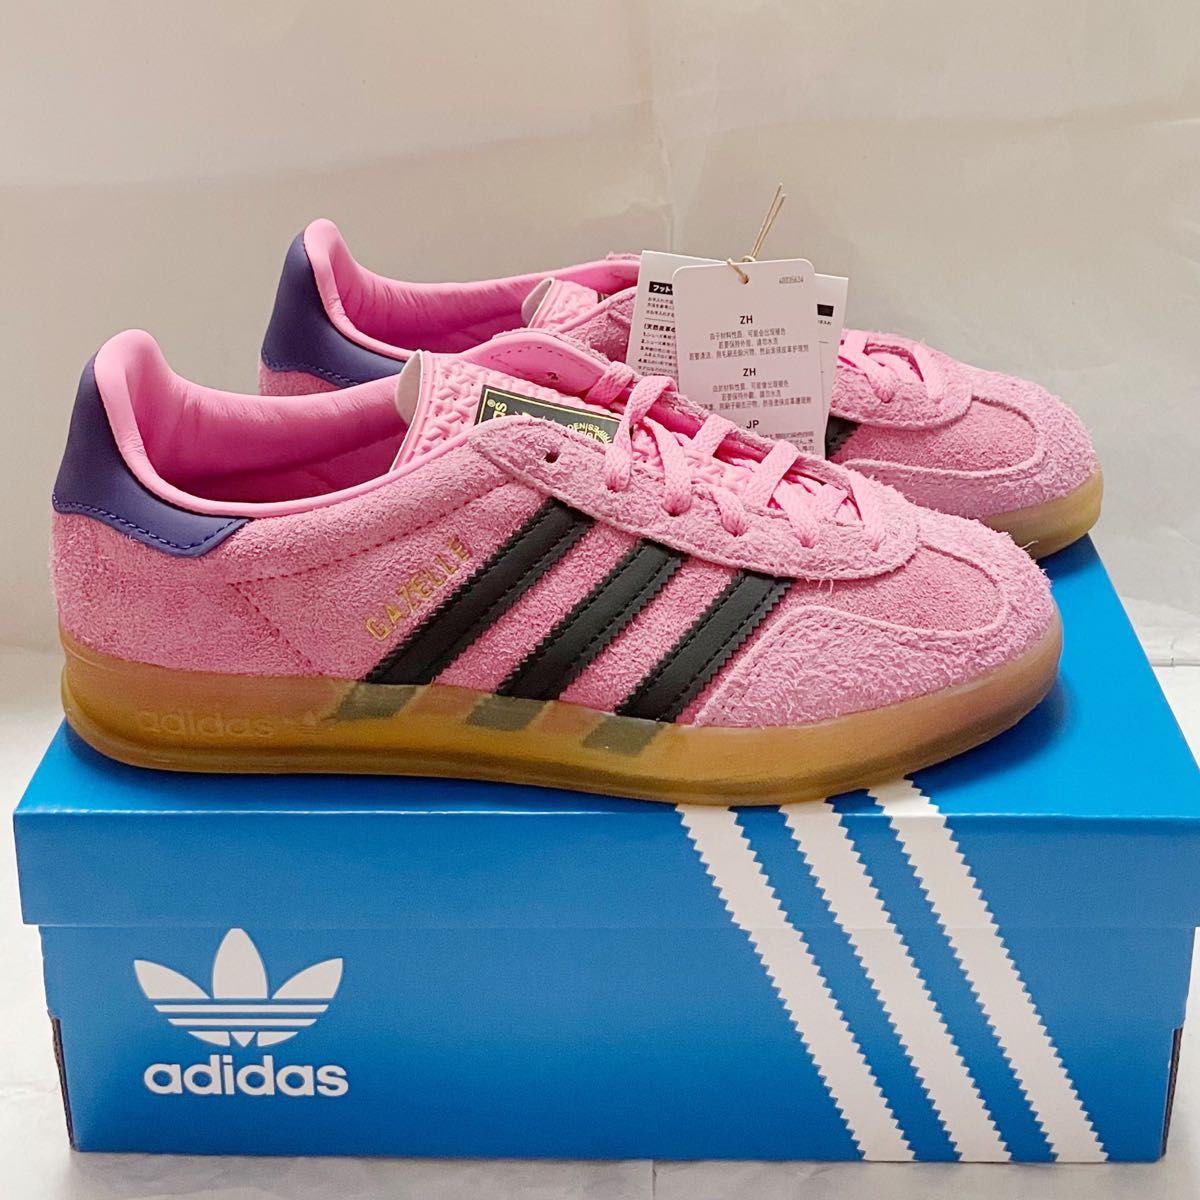 adidas Gazelle Indoor Bliss Pink ガゼル ピンク